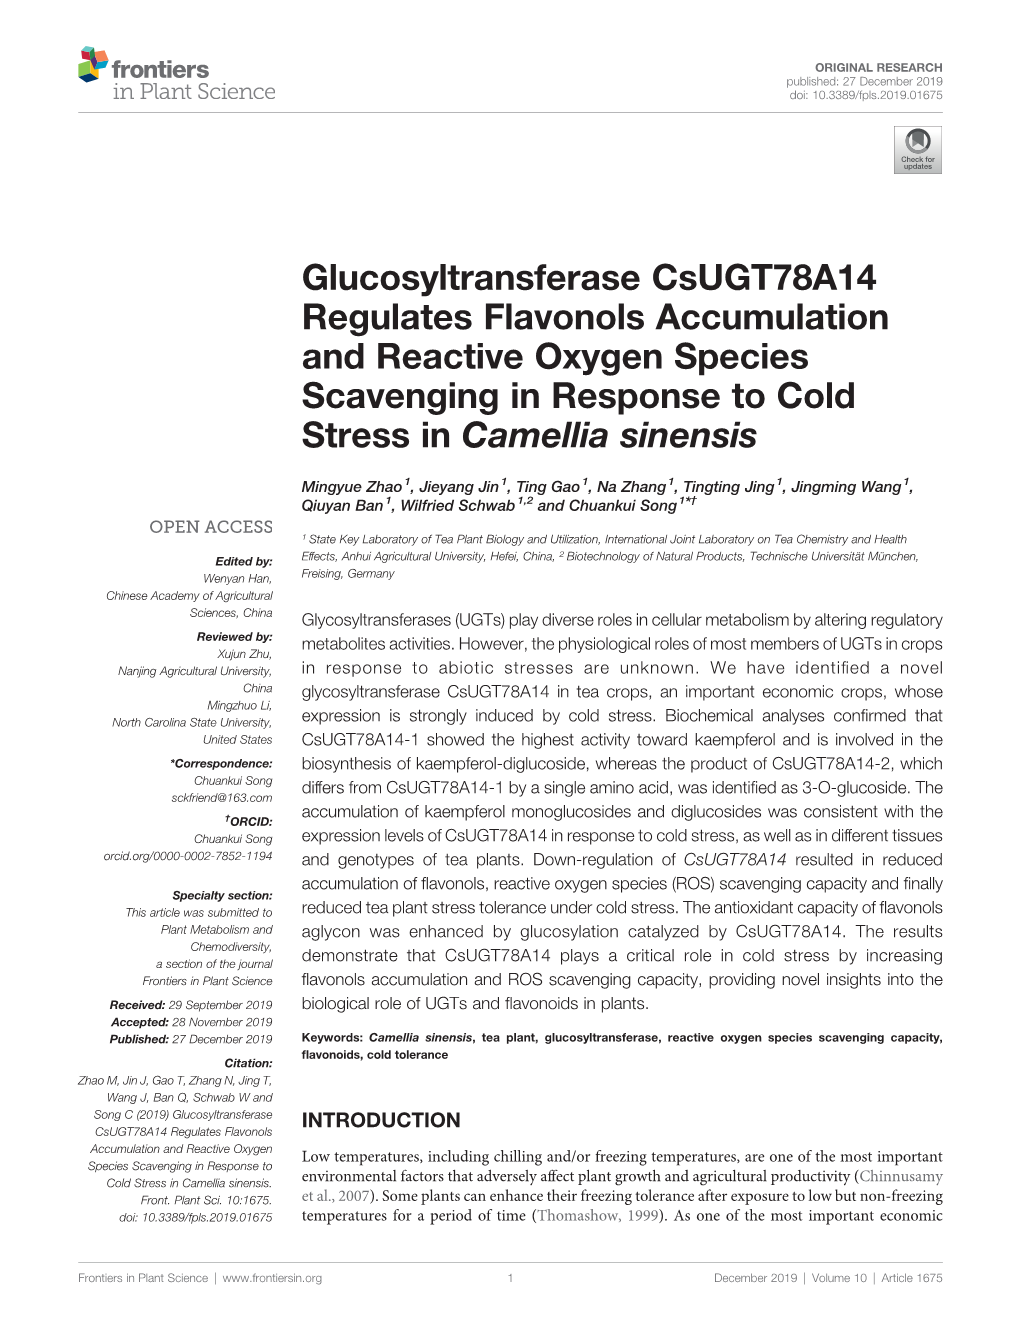 Glucosyltransferase Csugt78a14 Regulates Flavonols Accumulation and Reactive Oxygen Species Scavenging in Response to Cold Stress in Camellia Sinensis